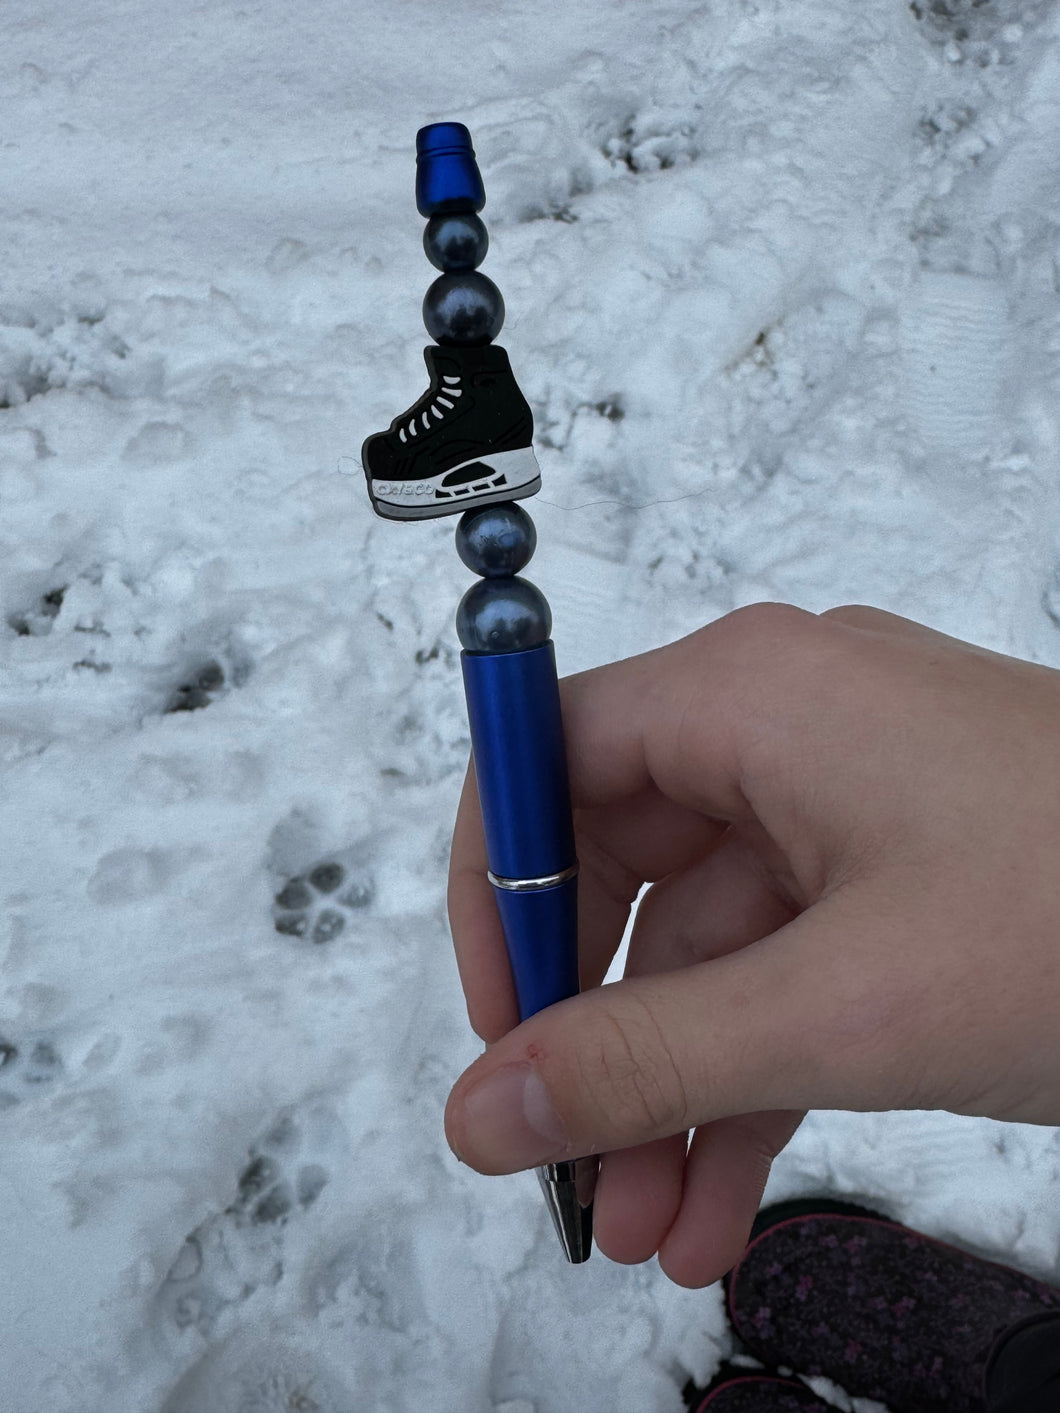 Blue pen with ice skate